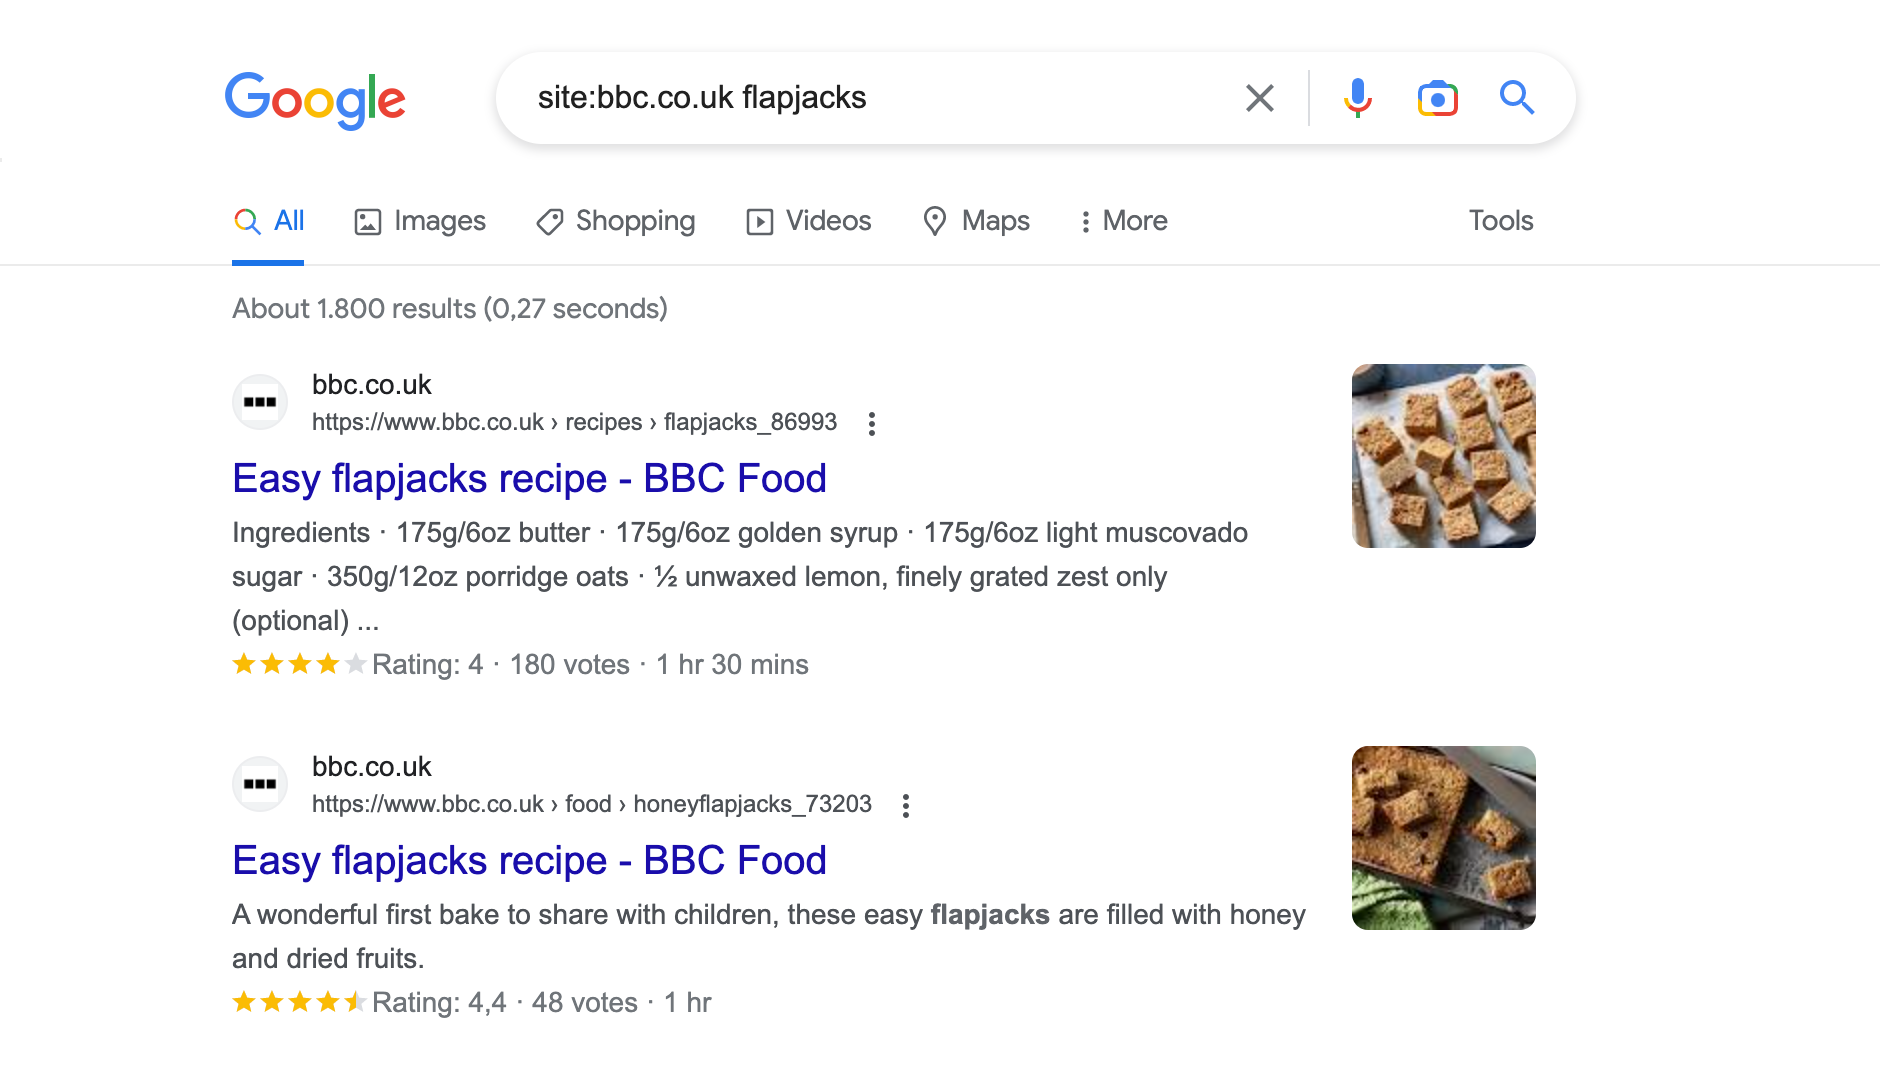 A Google site: query for the keyword flapjacks on bbc.co.uk. The first two results are URLs to specific recipes. About 1,800 results are displayed.